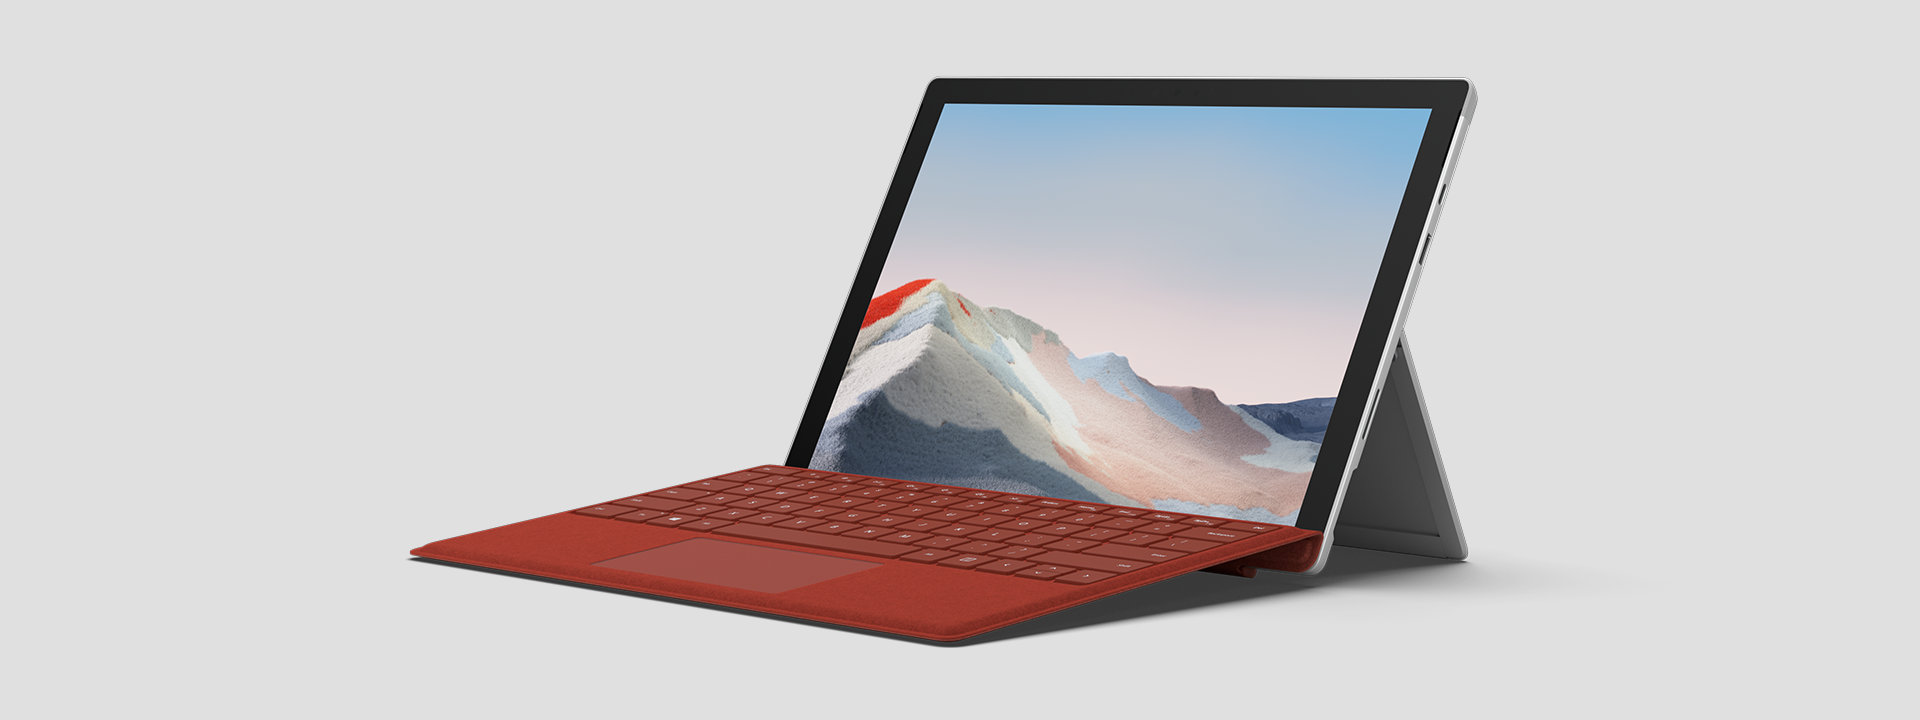 Surface Pro 7+ for Business propped up on kickstand showing screen and keyboard.